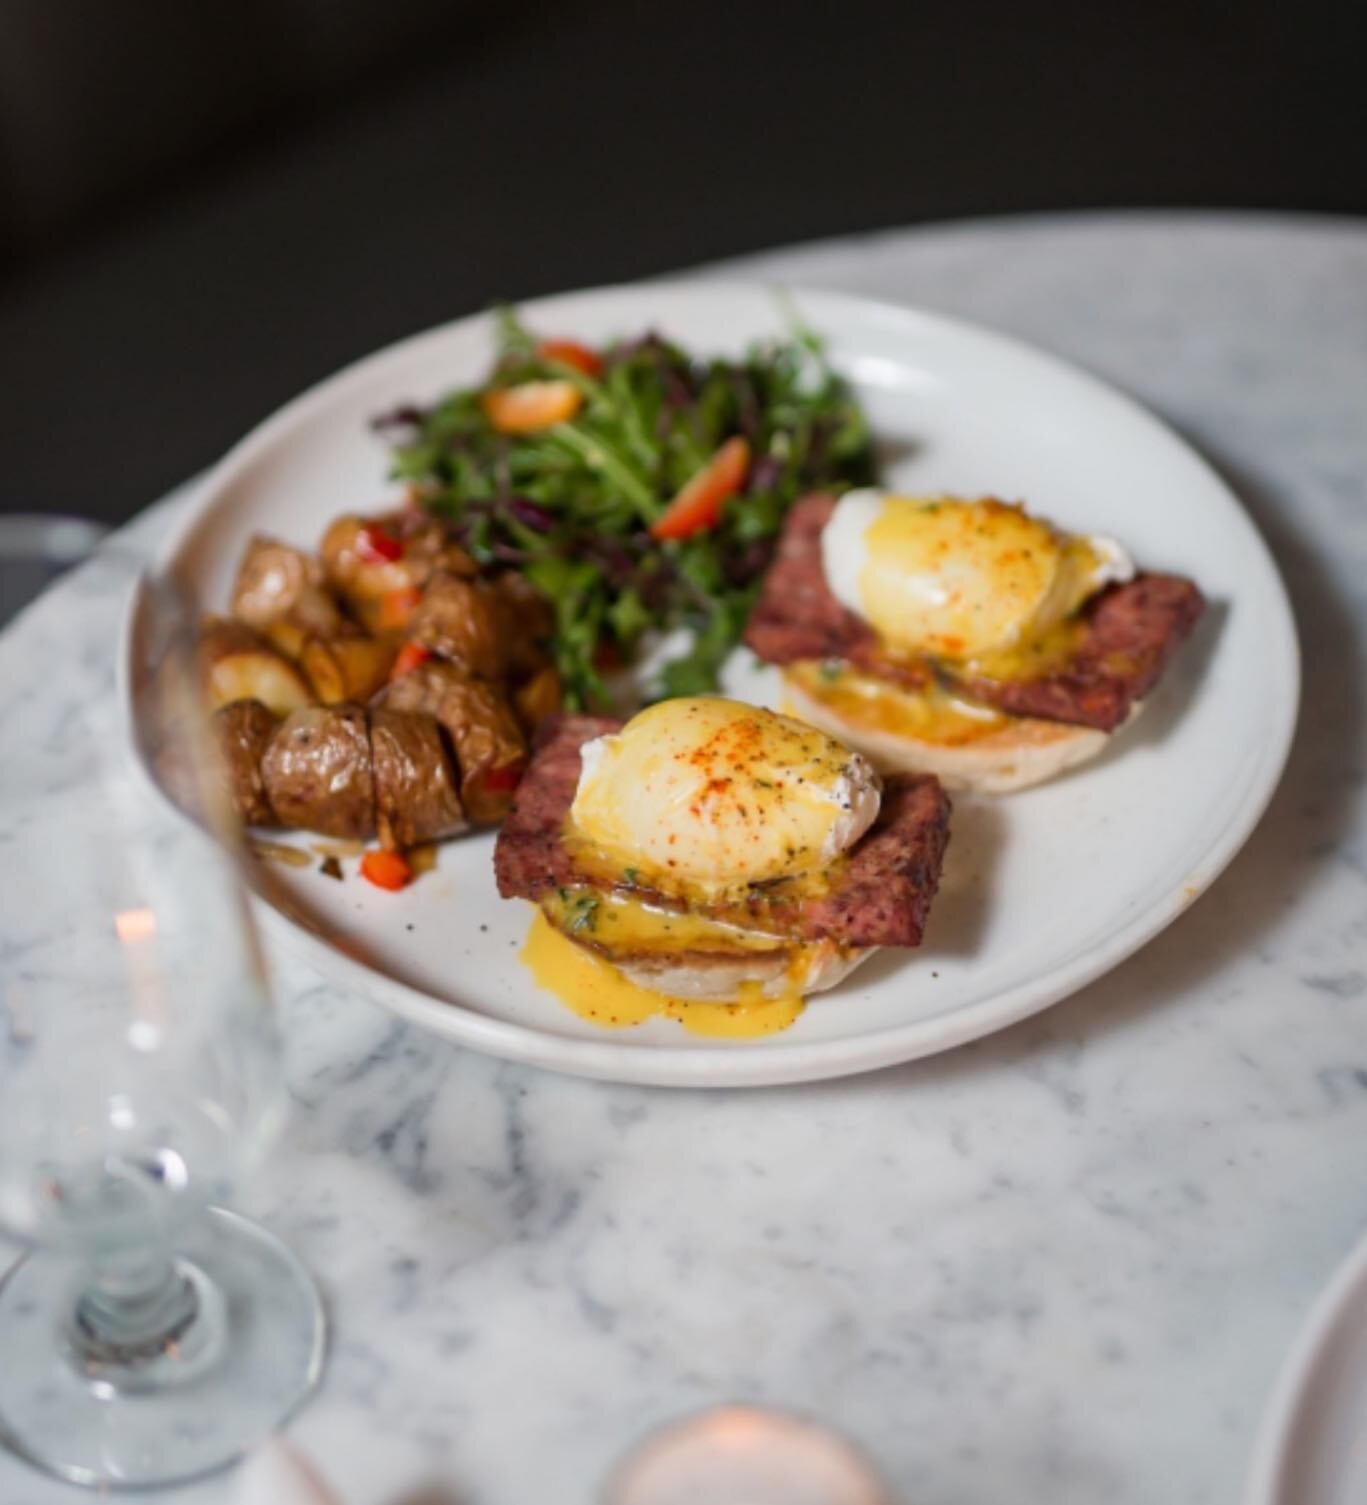 It&rsquo;s officially one week until Christmas Day, so we&rsquo;re taking that as our cue to start celebrating the holidays&hellip;and what better way than going for brunch?! A perfectly acceptable excuse to start drinking at noon. Come by Endswell f